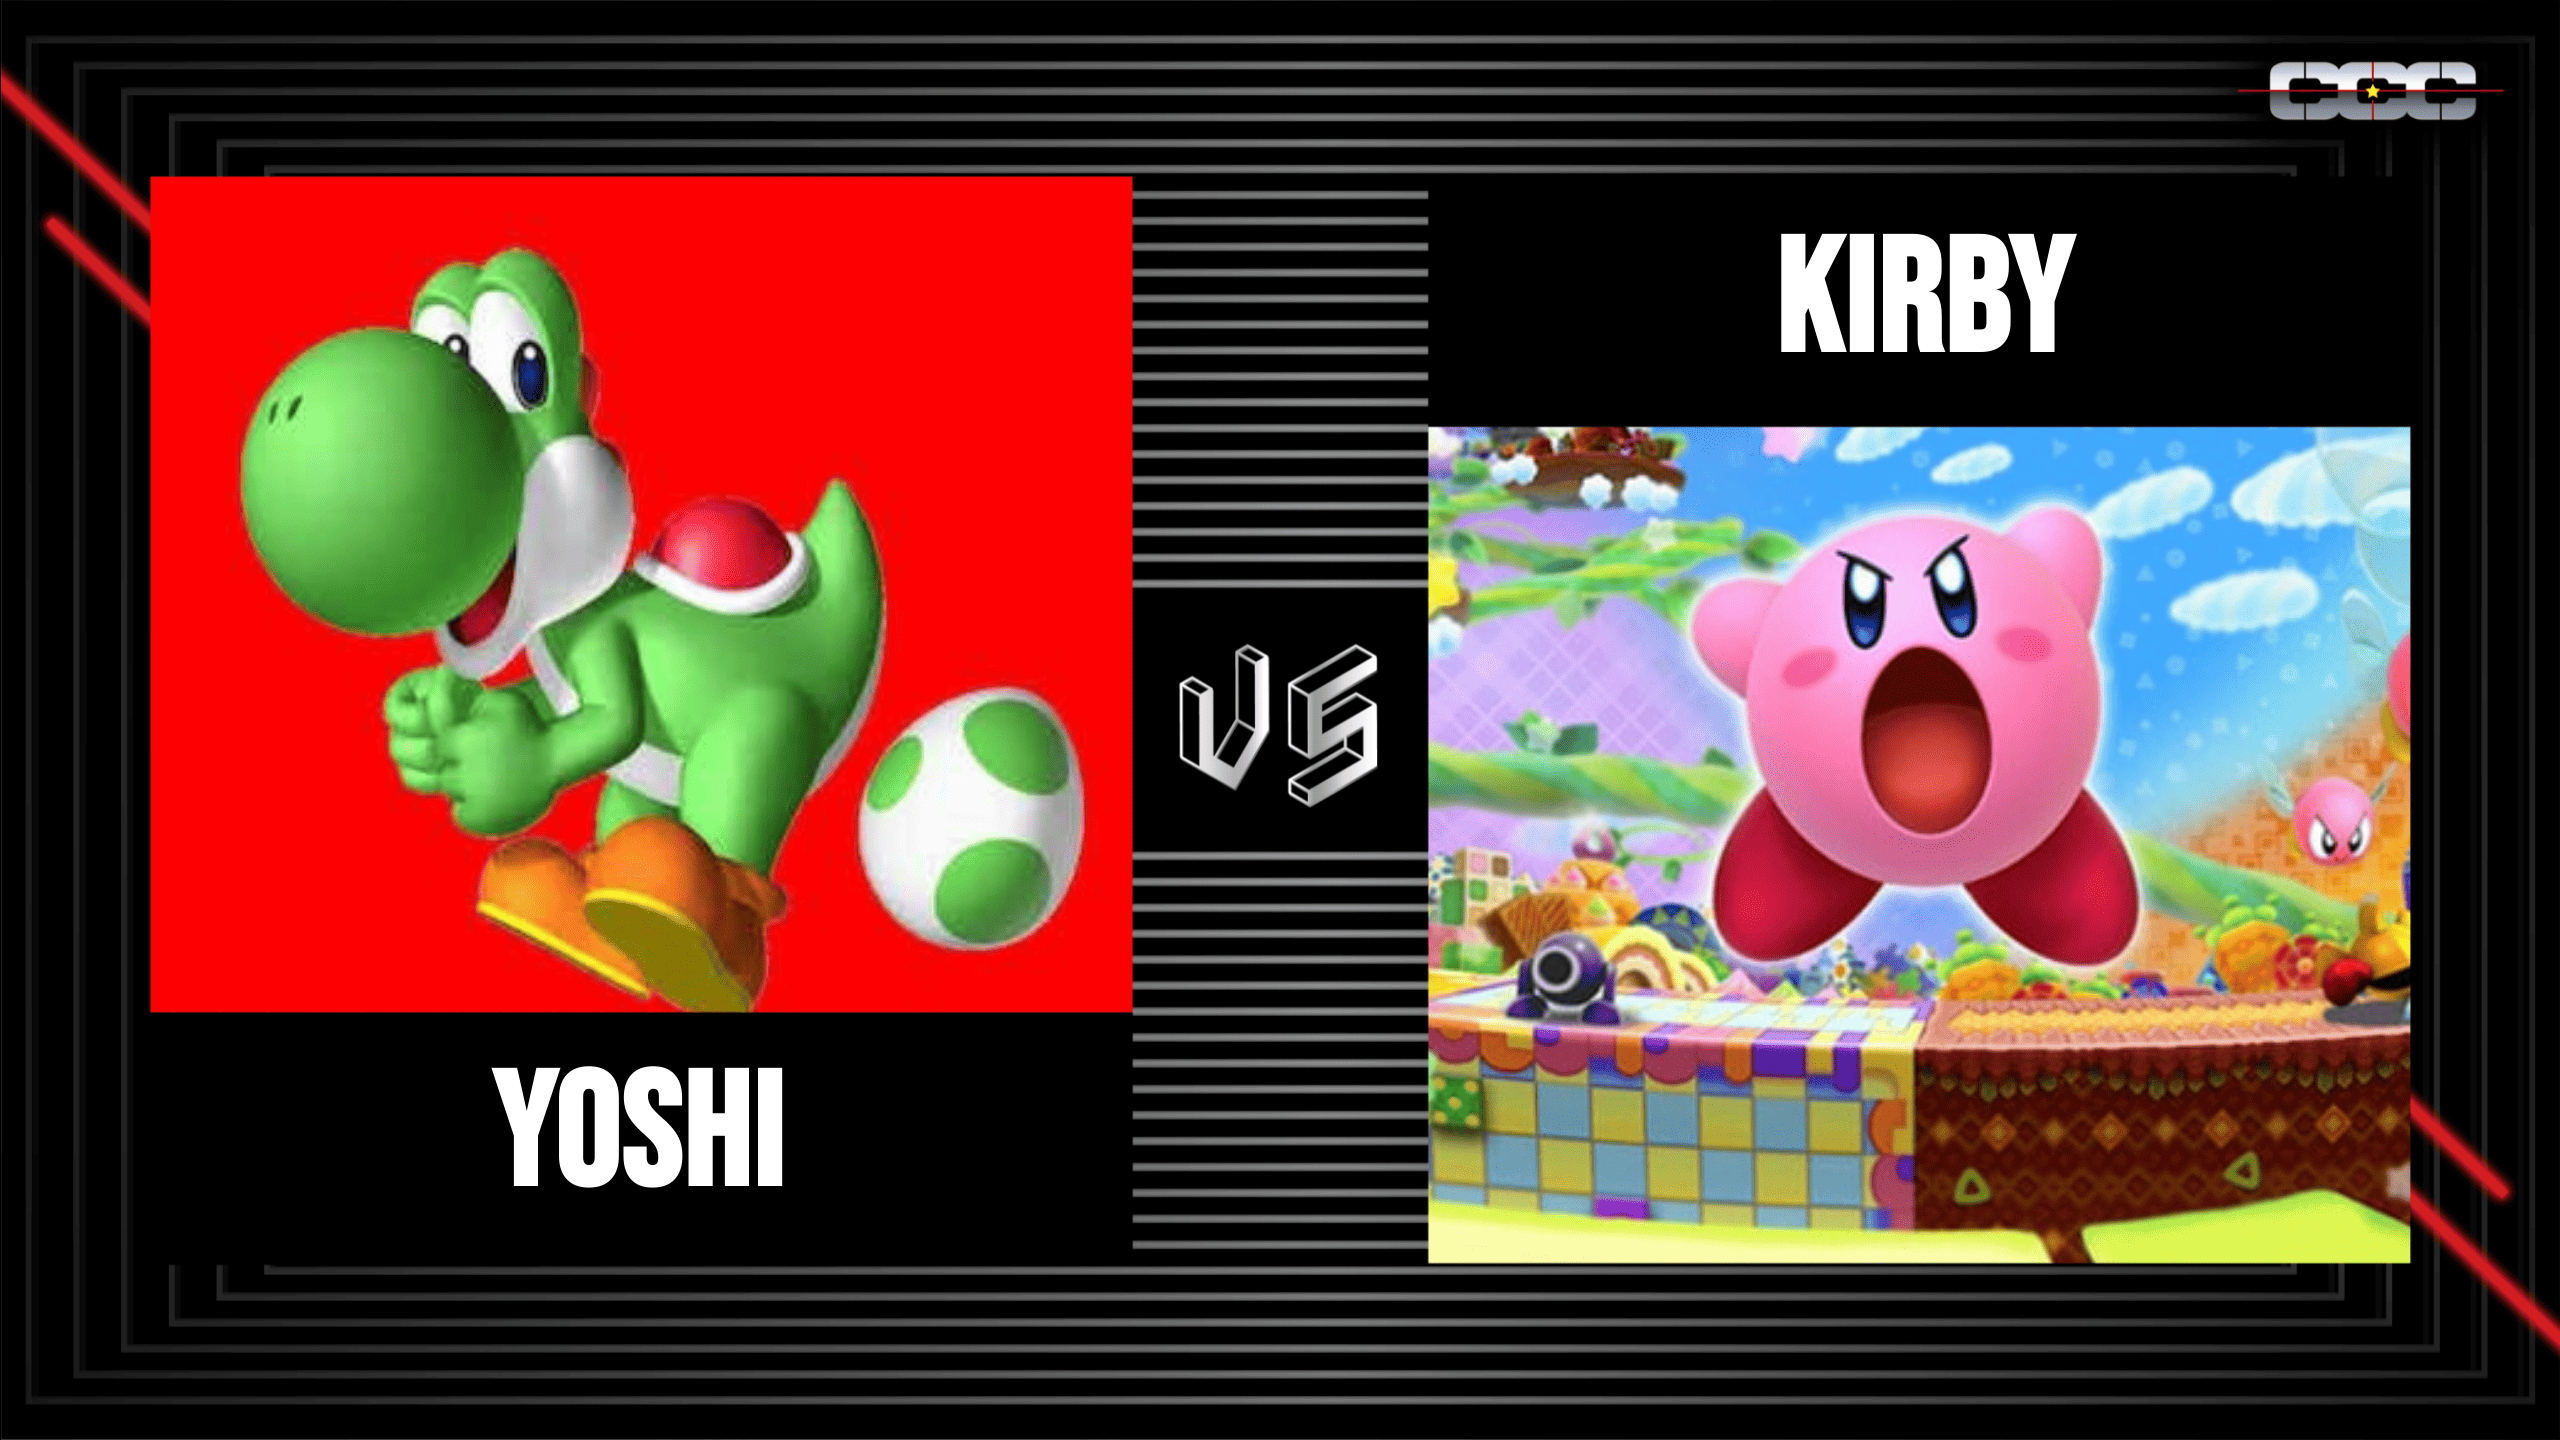 Play SNES Kirby Super Star (USA) Online in your browser